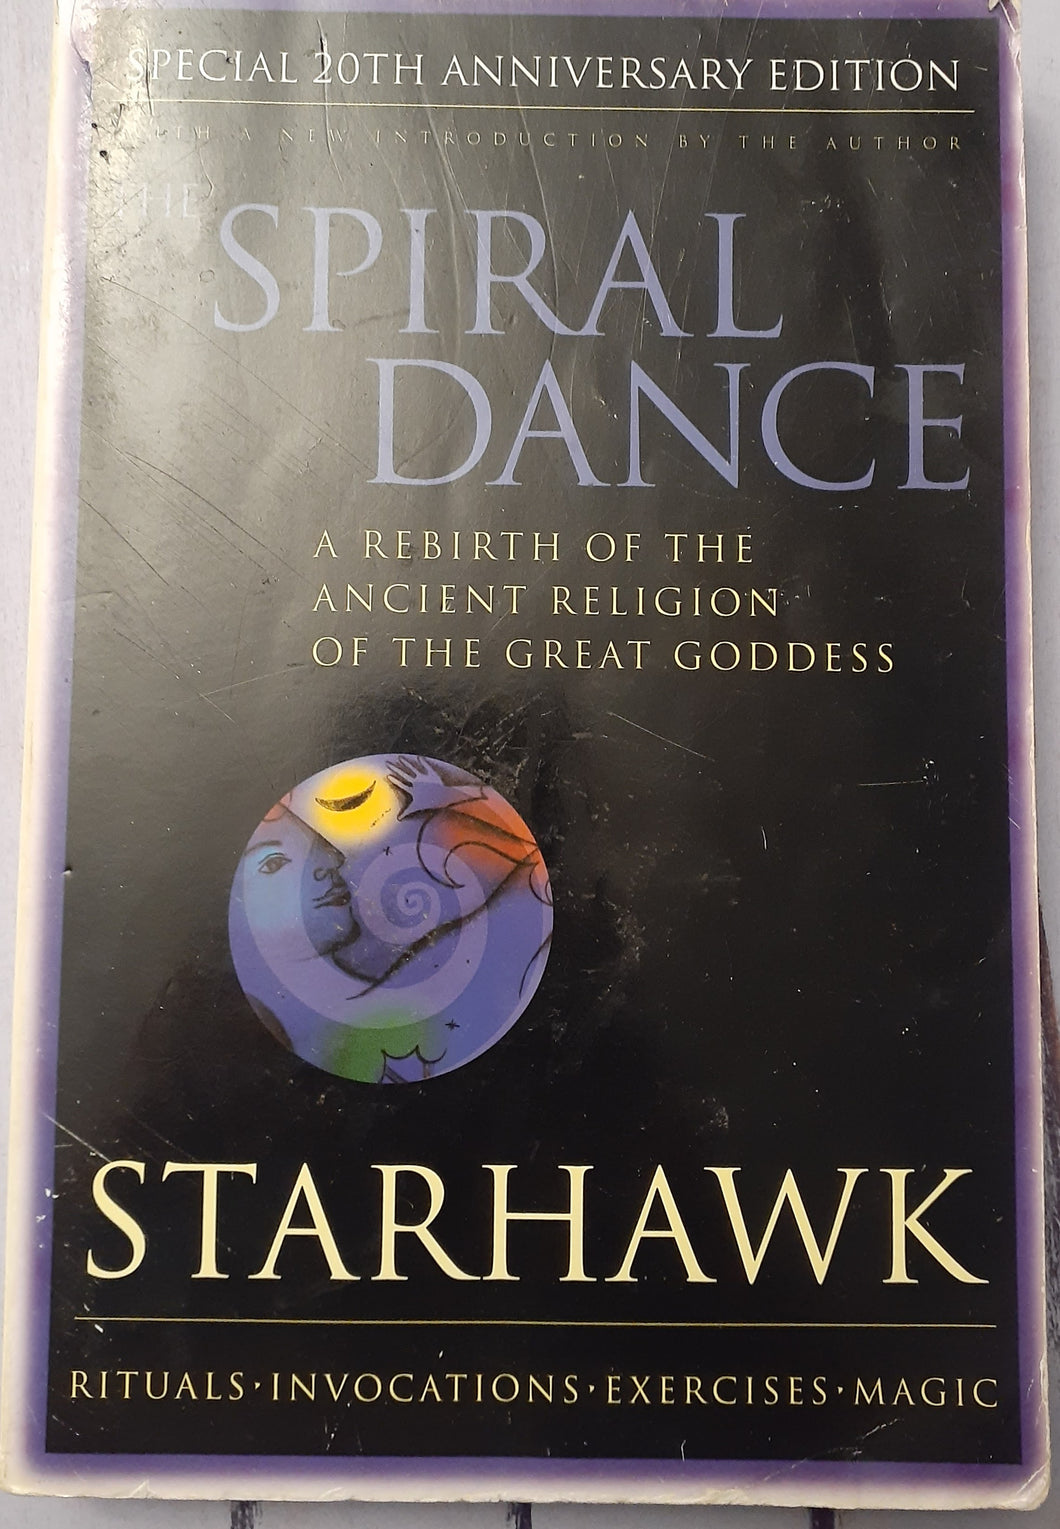 Spiral Dance: A Rebirth of the Ancient Religion of the Great Goddess